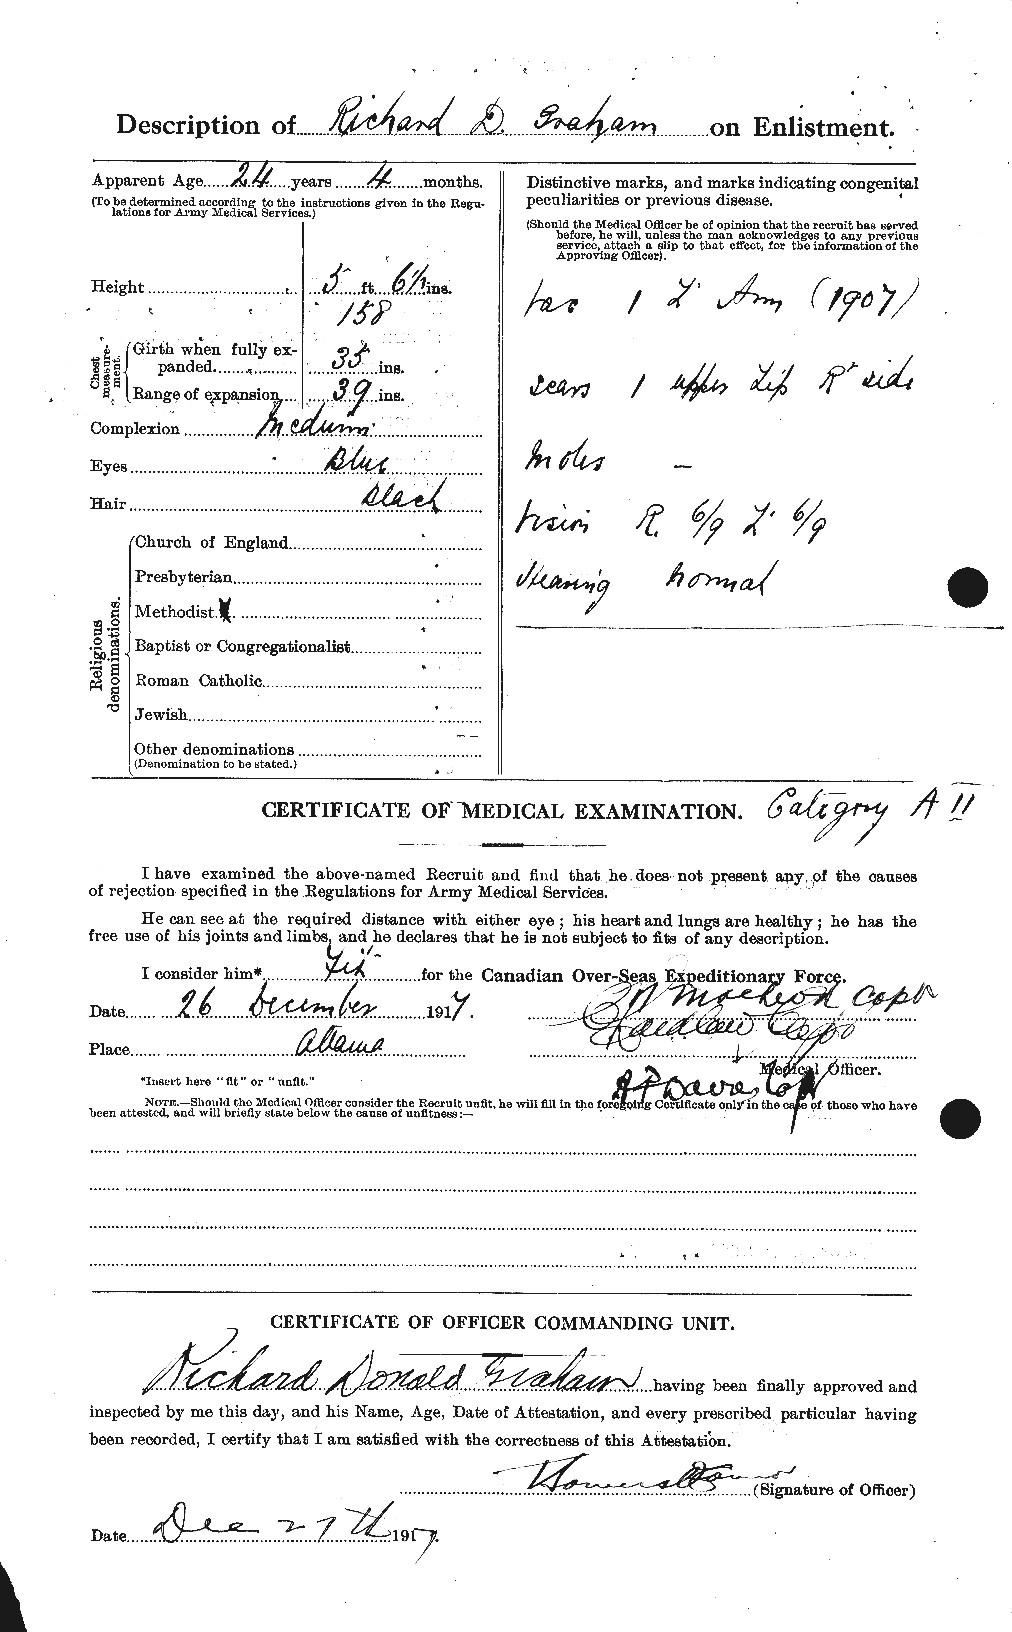 Personnel Records of the First World War - CEF 359368b